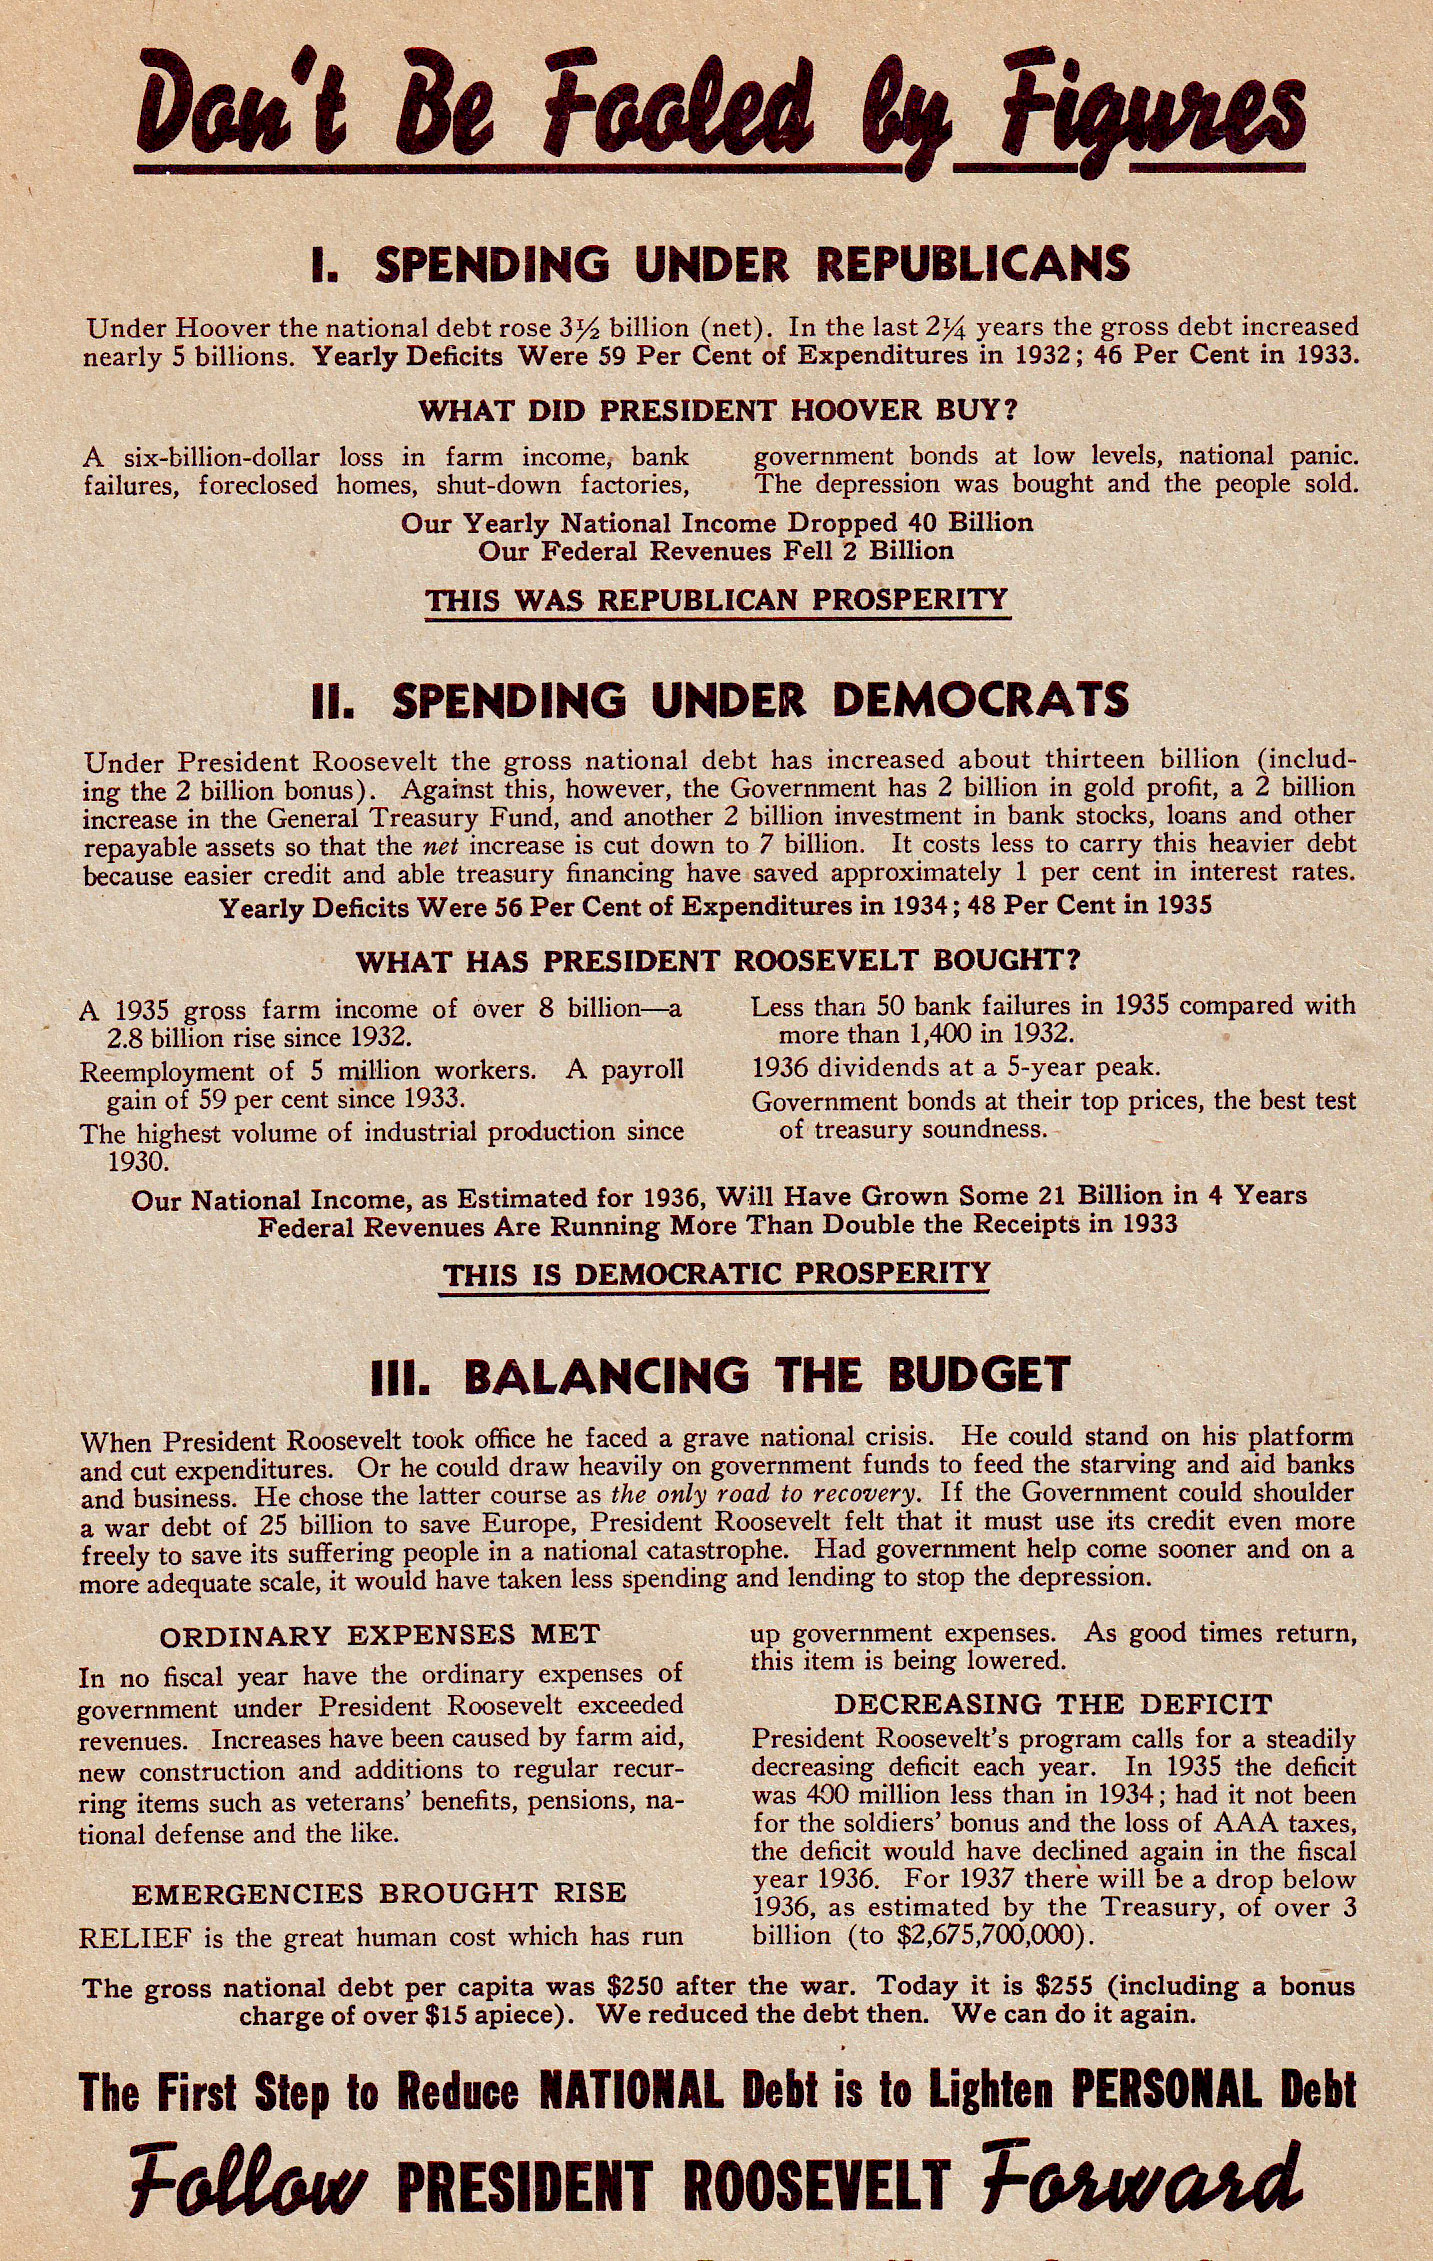 1936 re-election handbill for Roosevelt promoting his economic policy